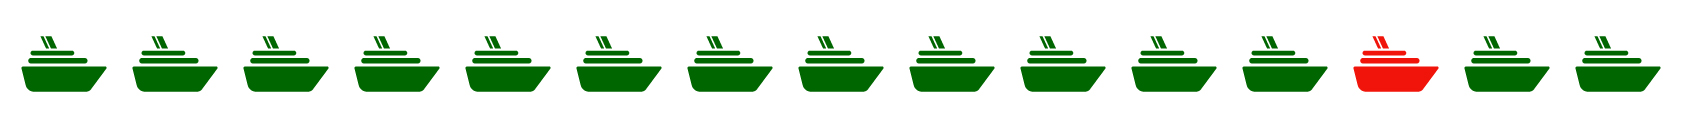 A row of green ship icons.